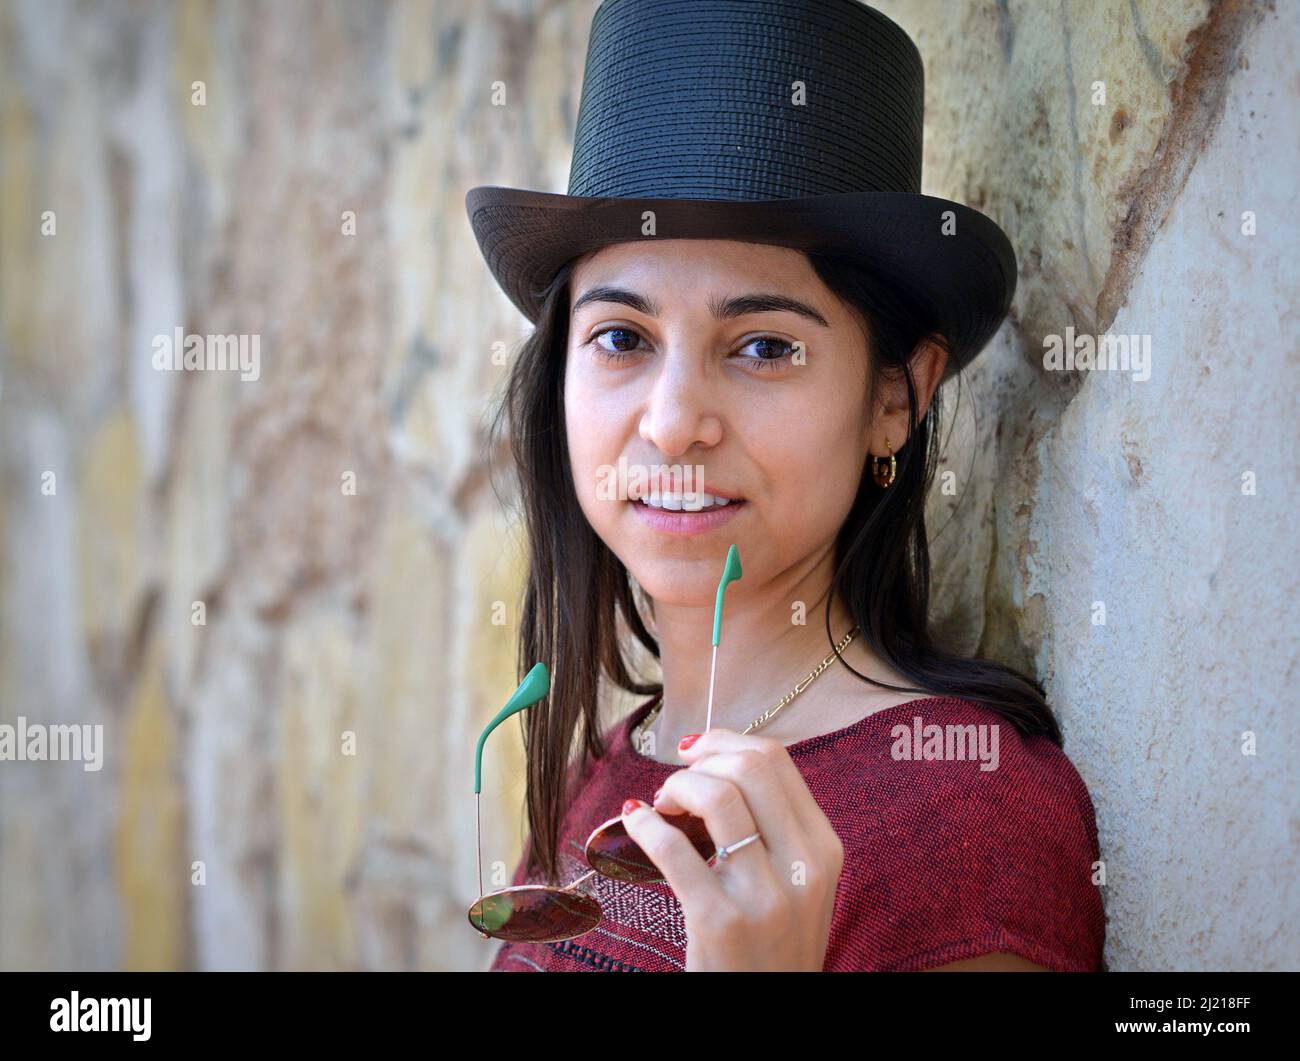 Young beautiful charming Latina woman wears a black top hat, holds sunglasses and smiles at the viewer in front of a stone wall background. Stock Photo